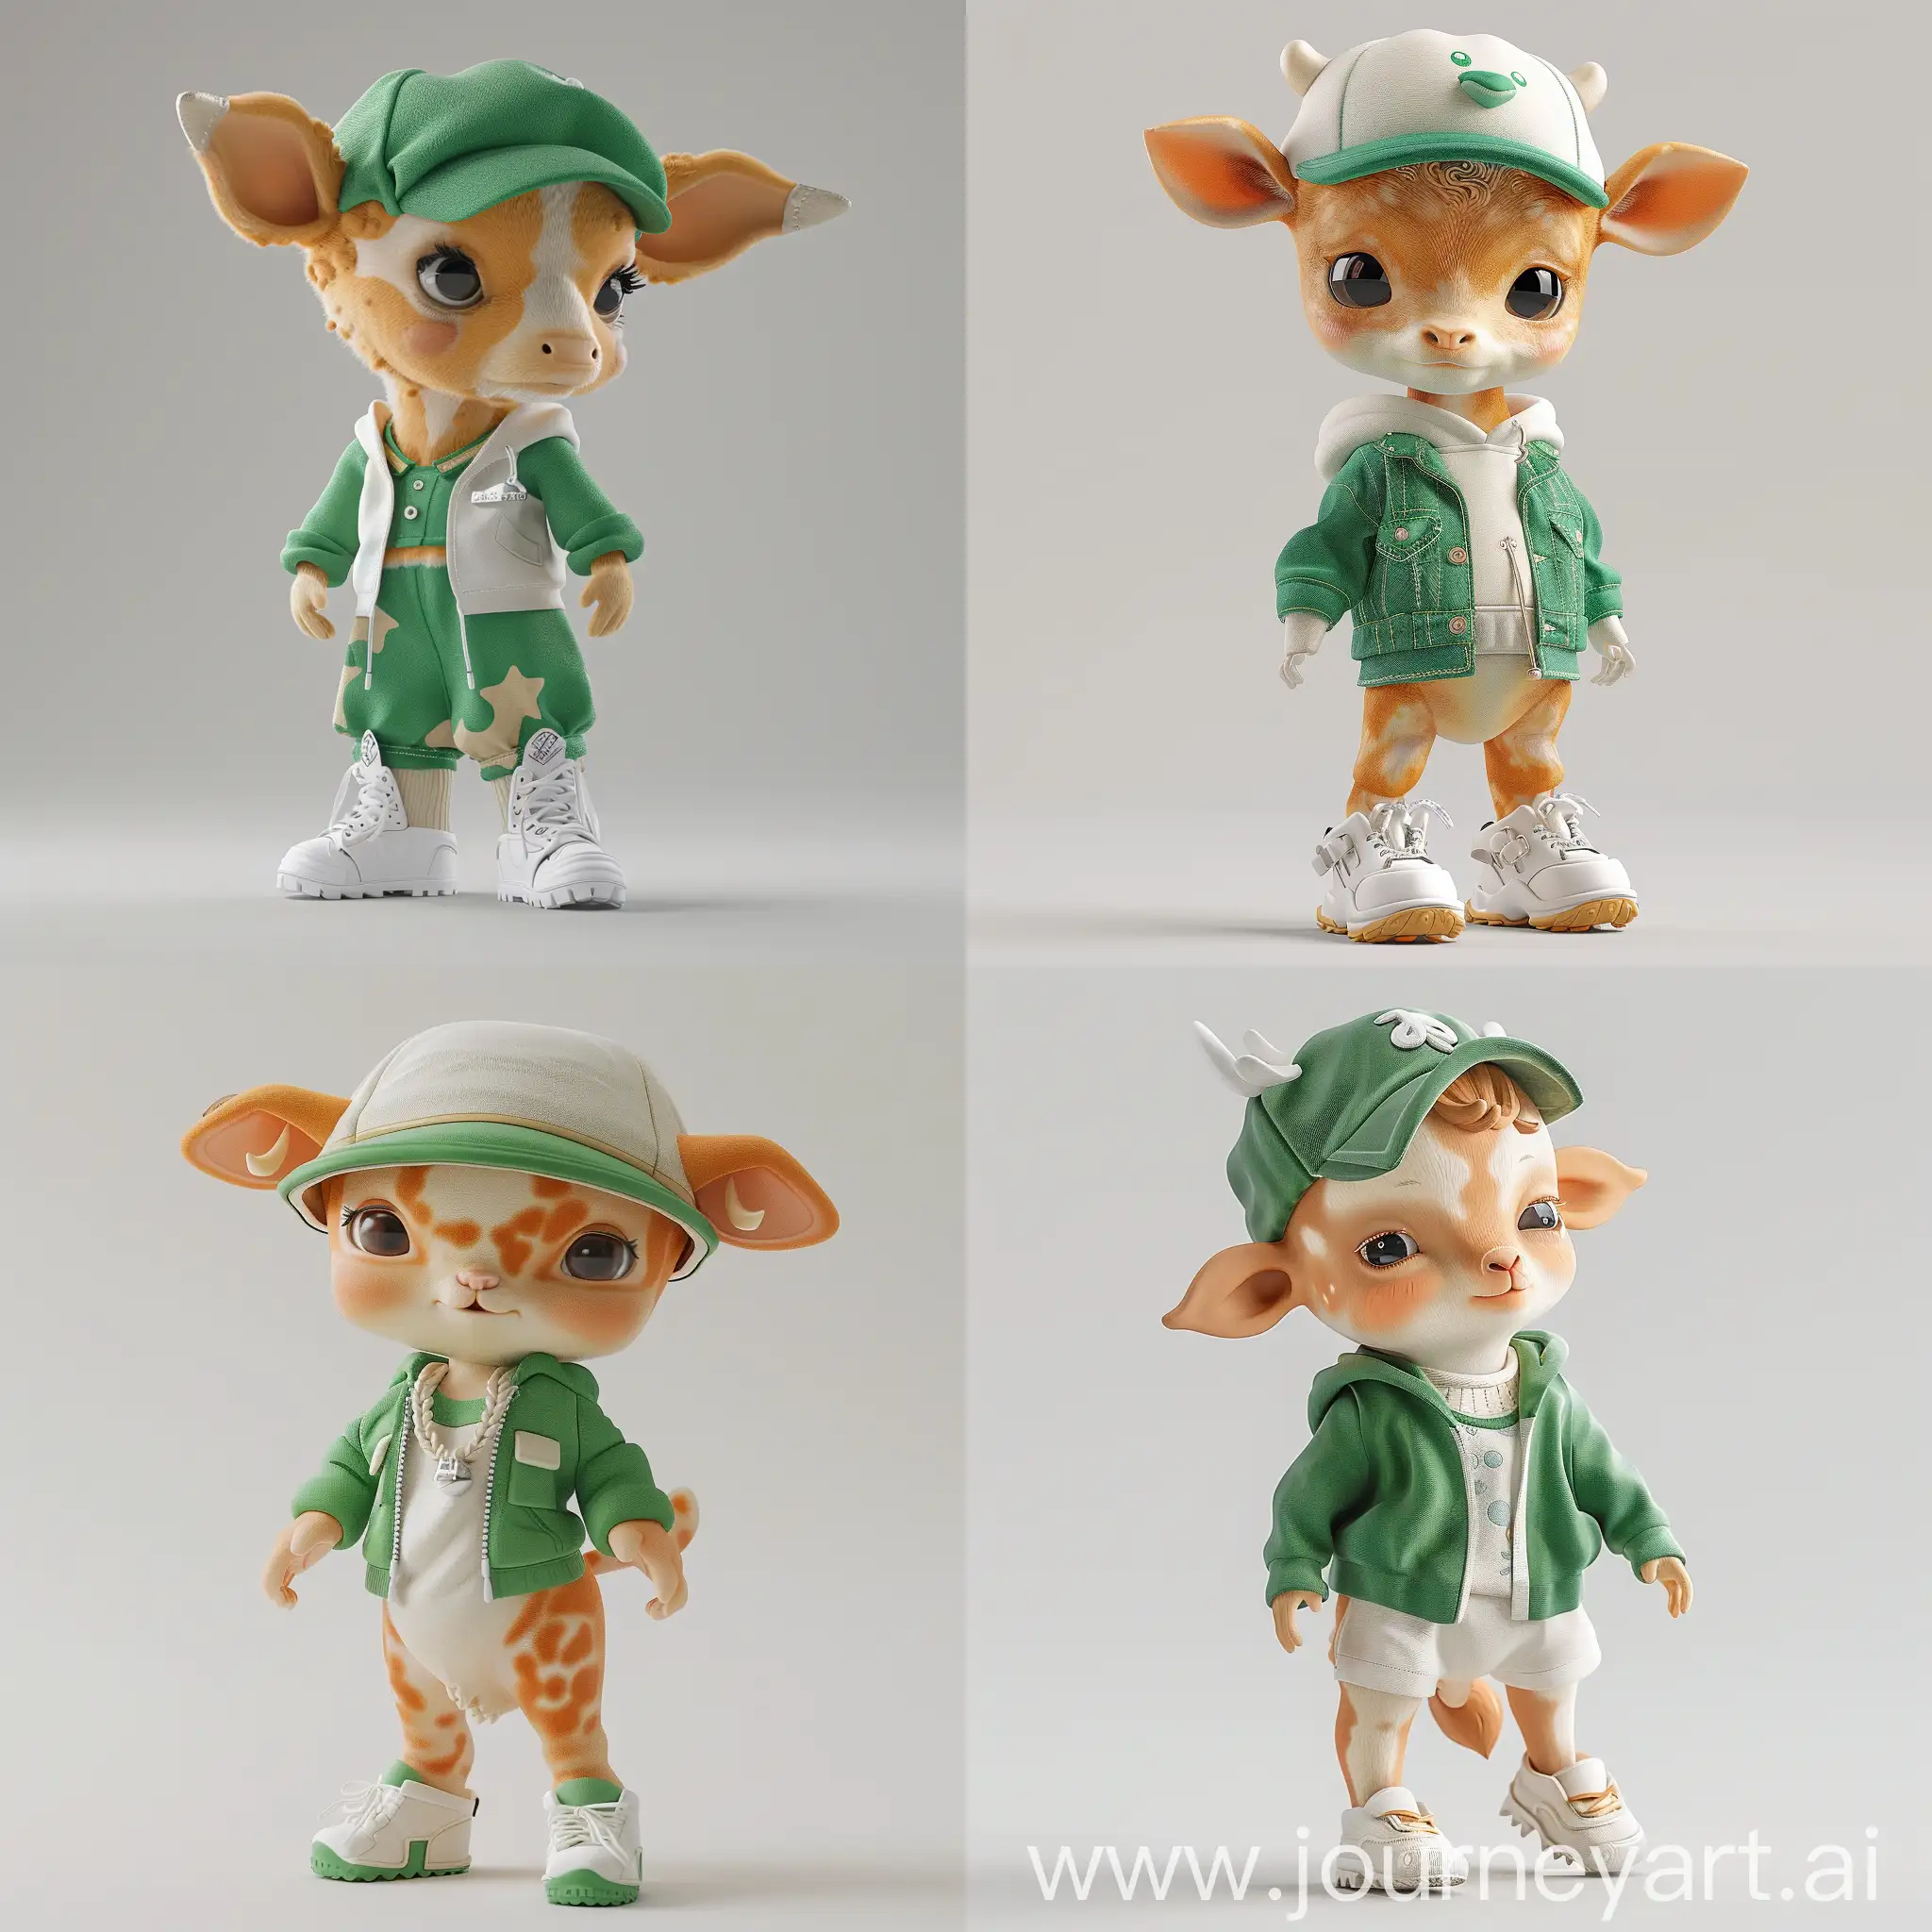 Super cute calf, Upright view, Side view, Rear view, Hat, Green and white clothes, Small white shoes, Standing posture, A clean background, Bubble Mart super cute IP, Blind box toy, Delicate Sekizawa, OC rendering, The best quality, 3D rendering